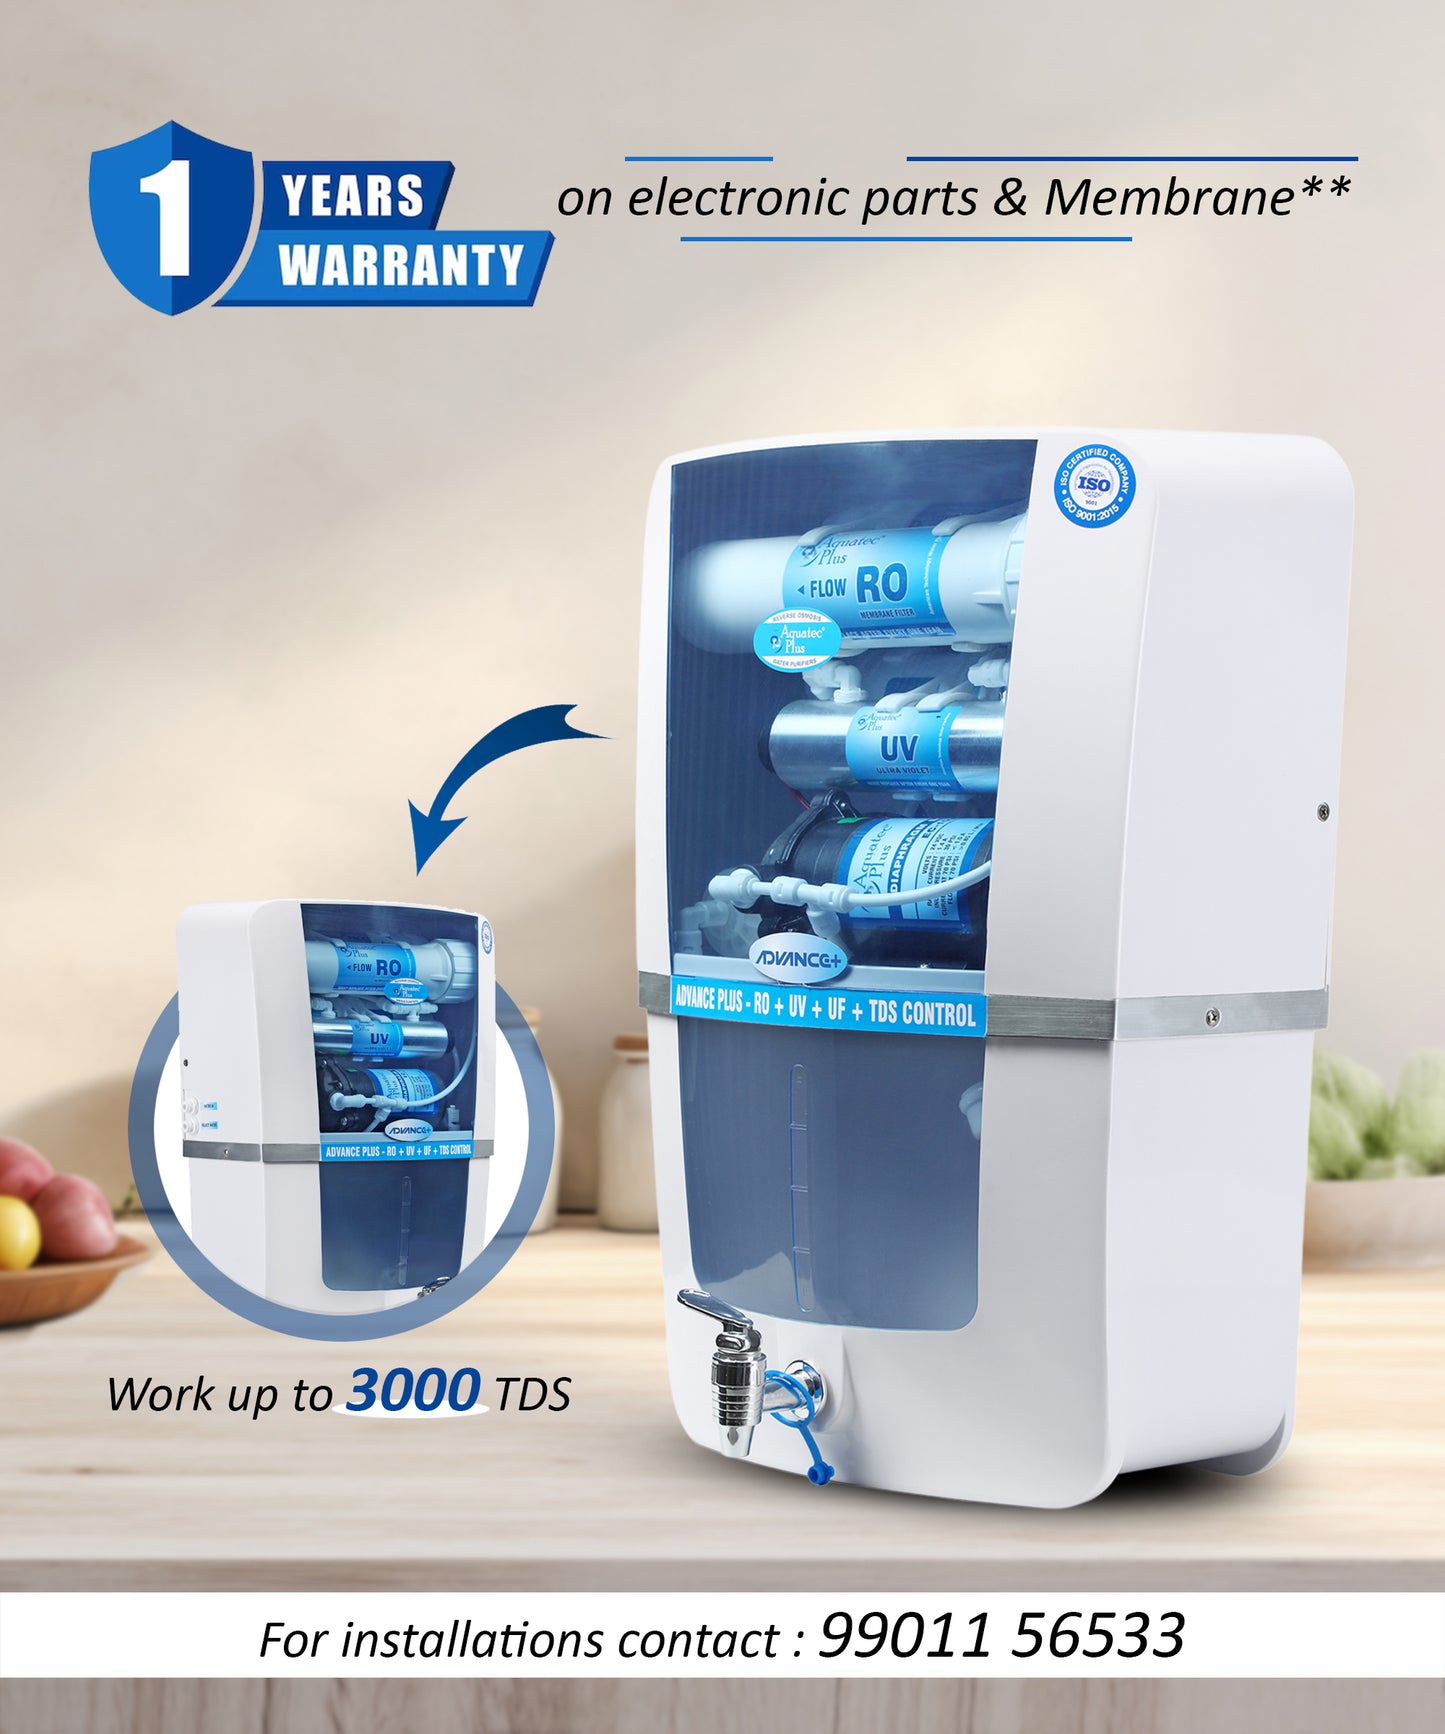 Advance Plus 12L RO+UV+UF+TDS Water Purifier for Home (White, Blue)